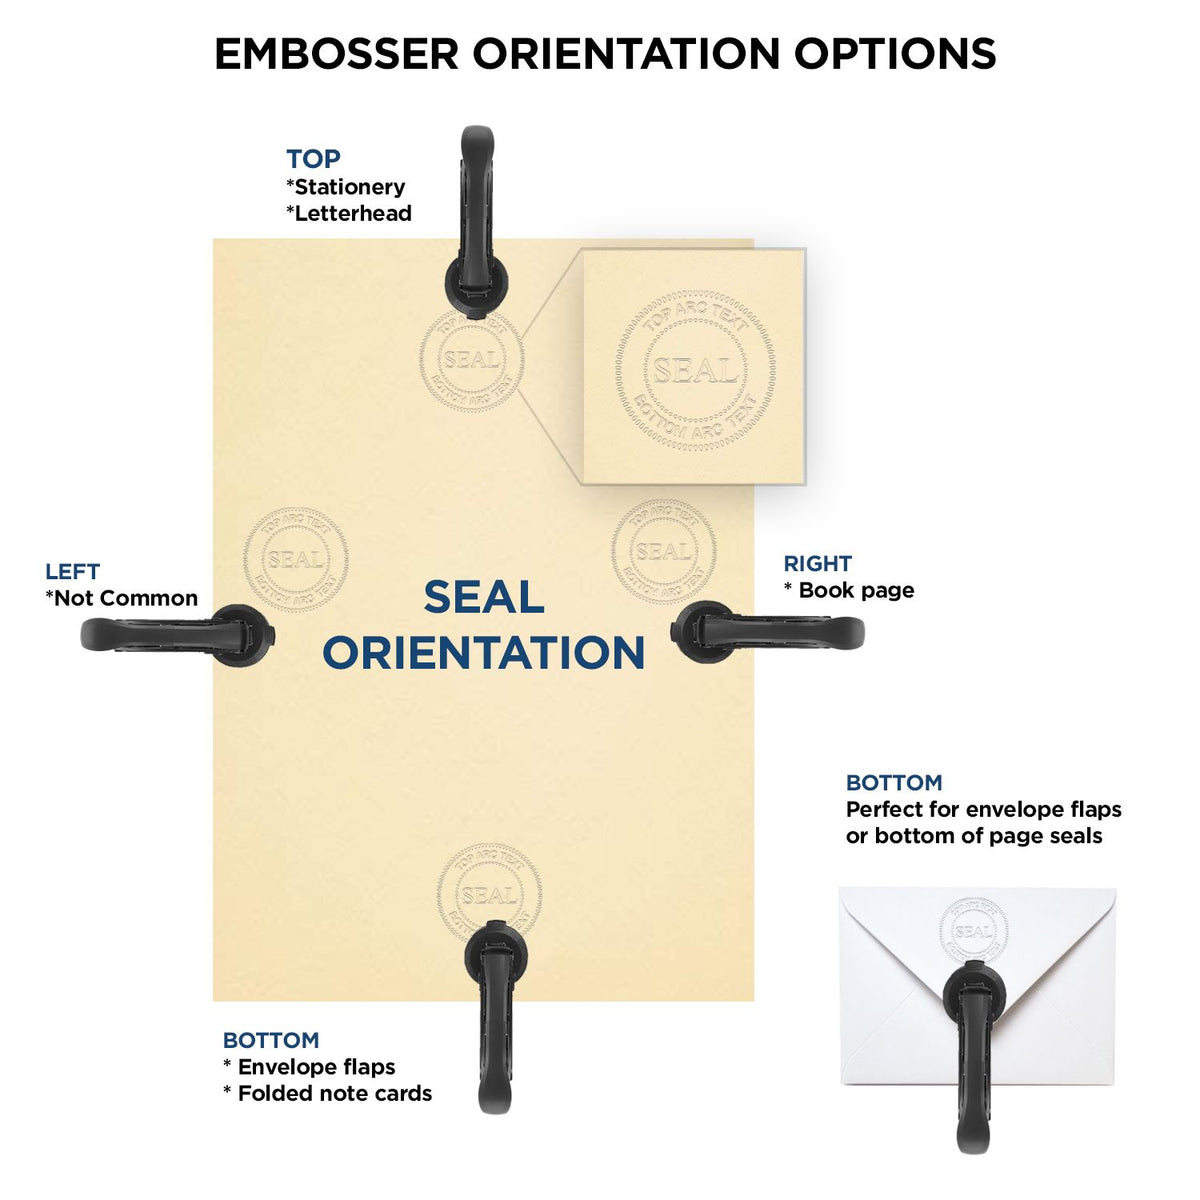 An infographic for the Long Reach Alabama Land Surveyor Seal showing embosser orientation, this is showing examples of a top, bottom, right and left insert.